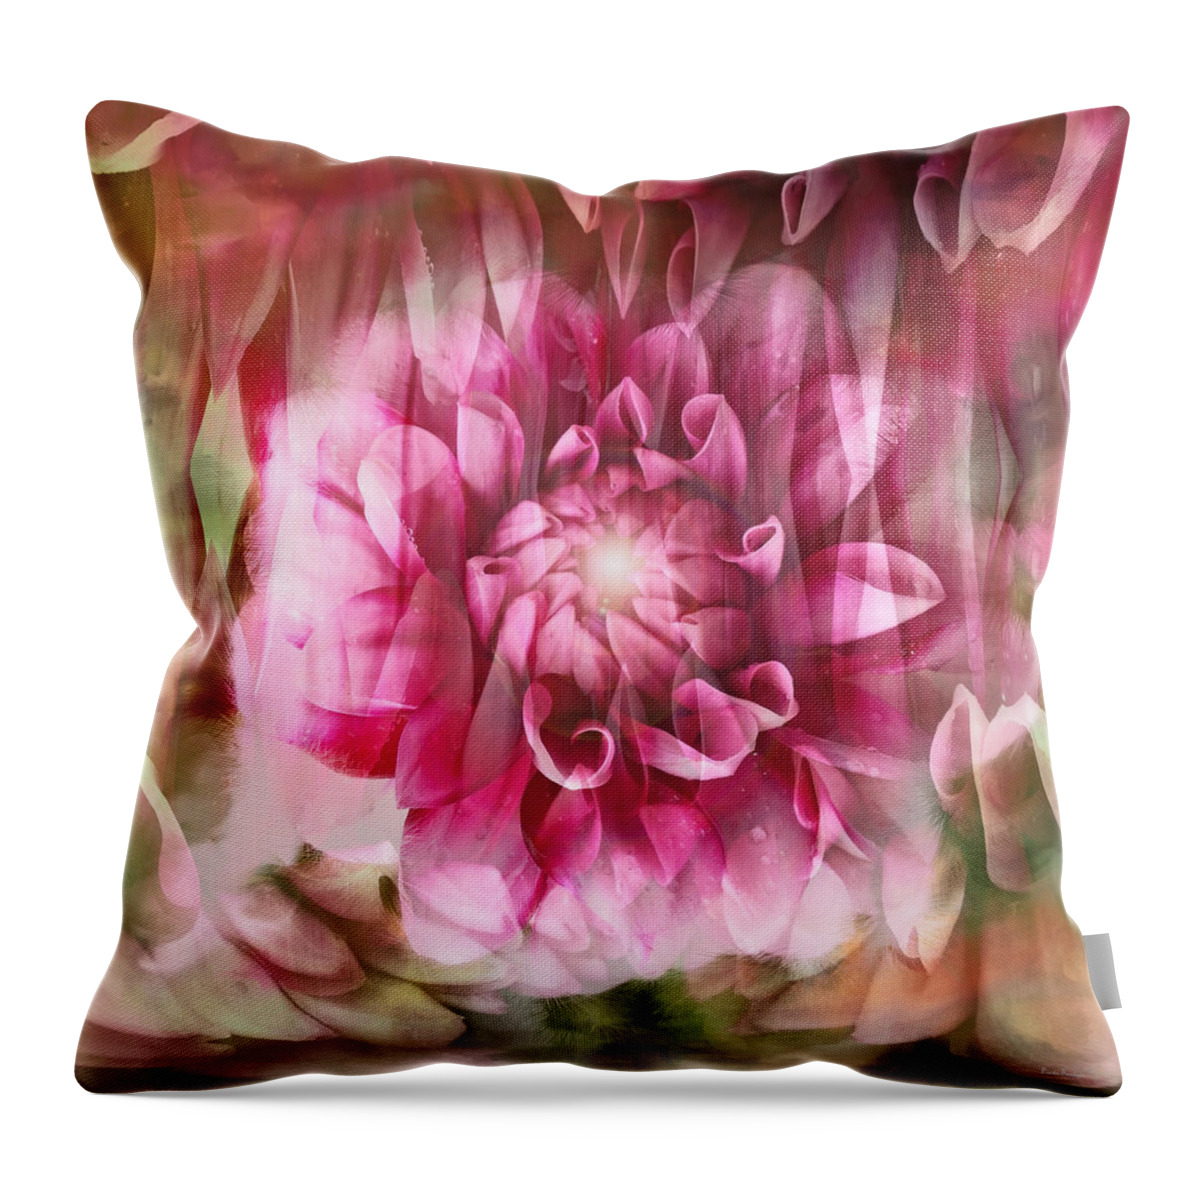 Spring Throw Pillow featuring the photograph Spring Dreaming by Linda Sannuti